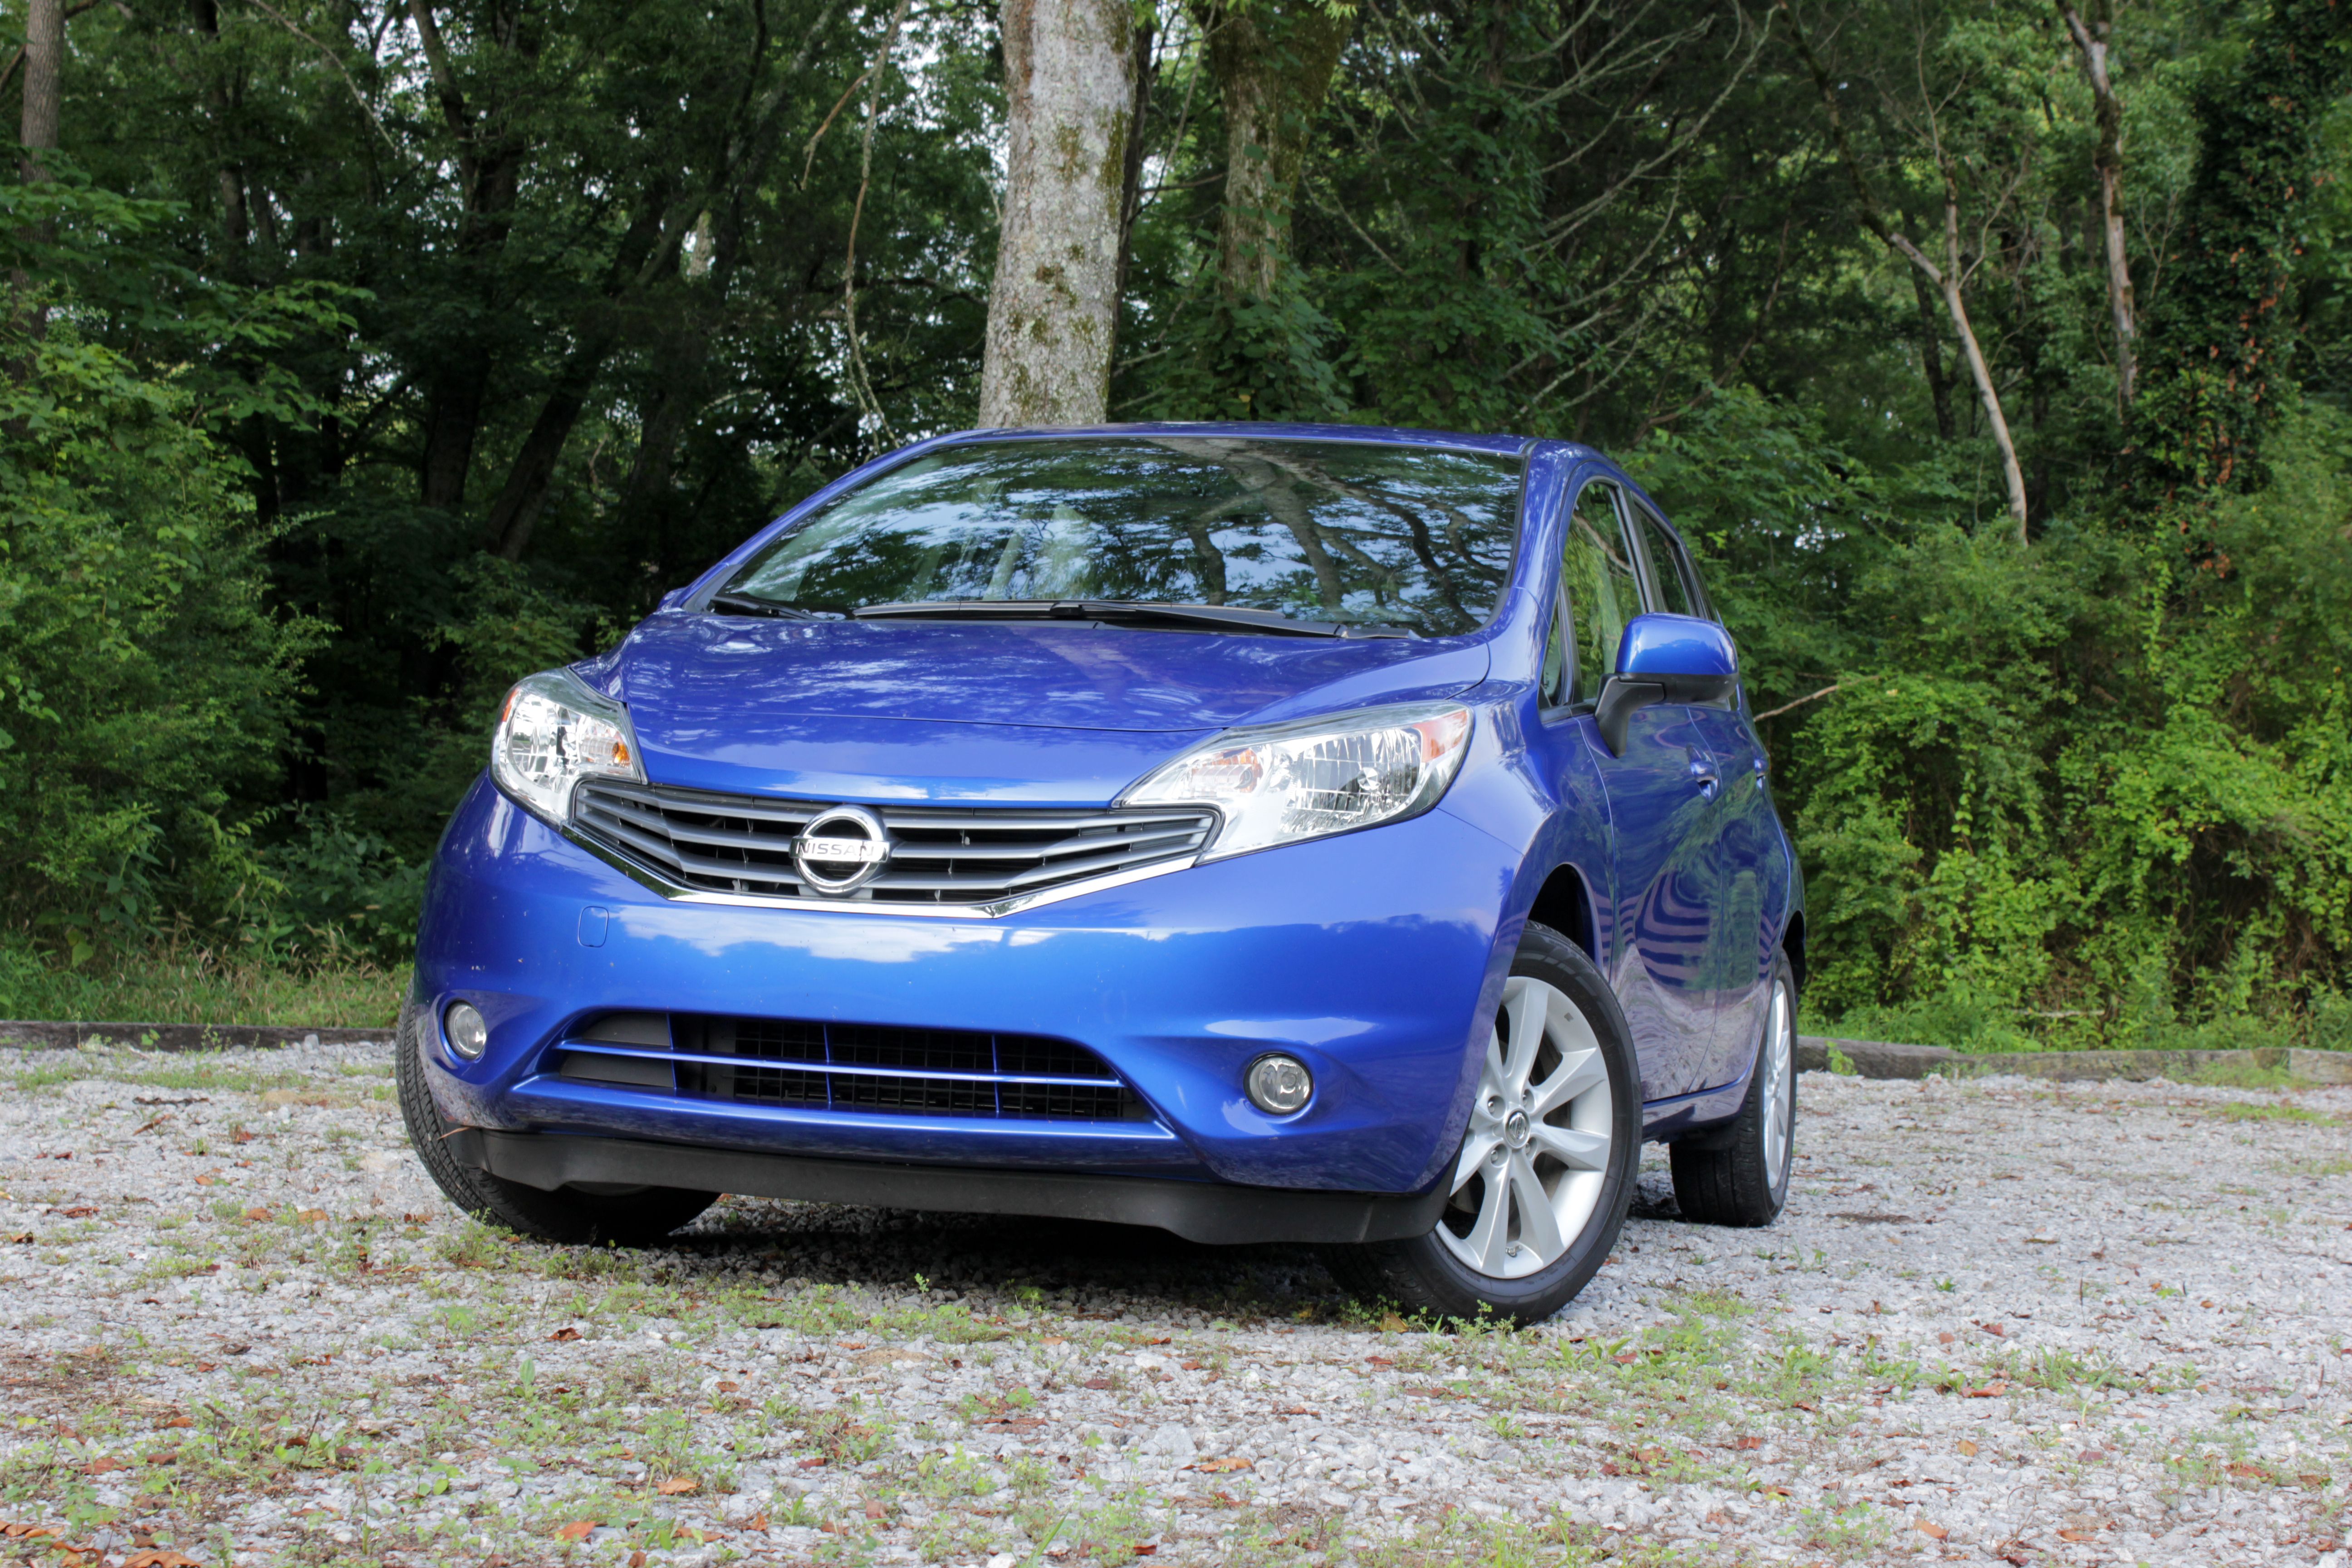 2014 Nissan Versa Note Review - Driven